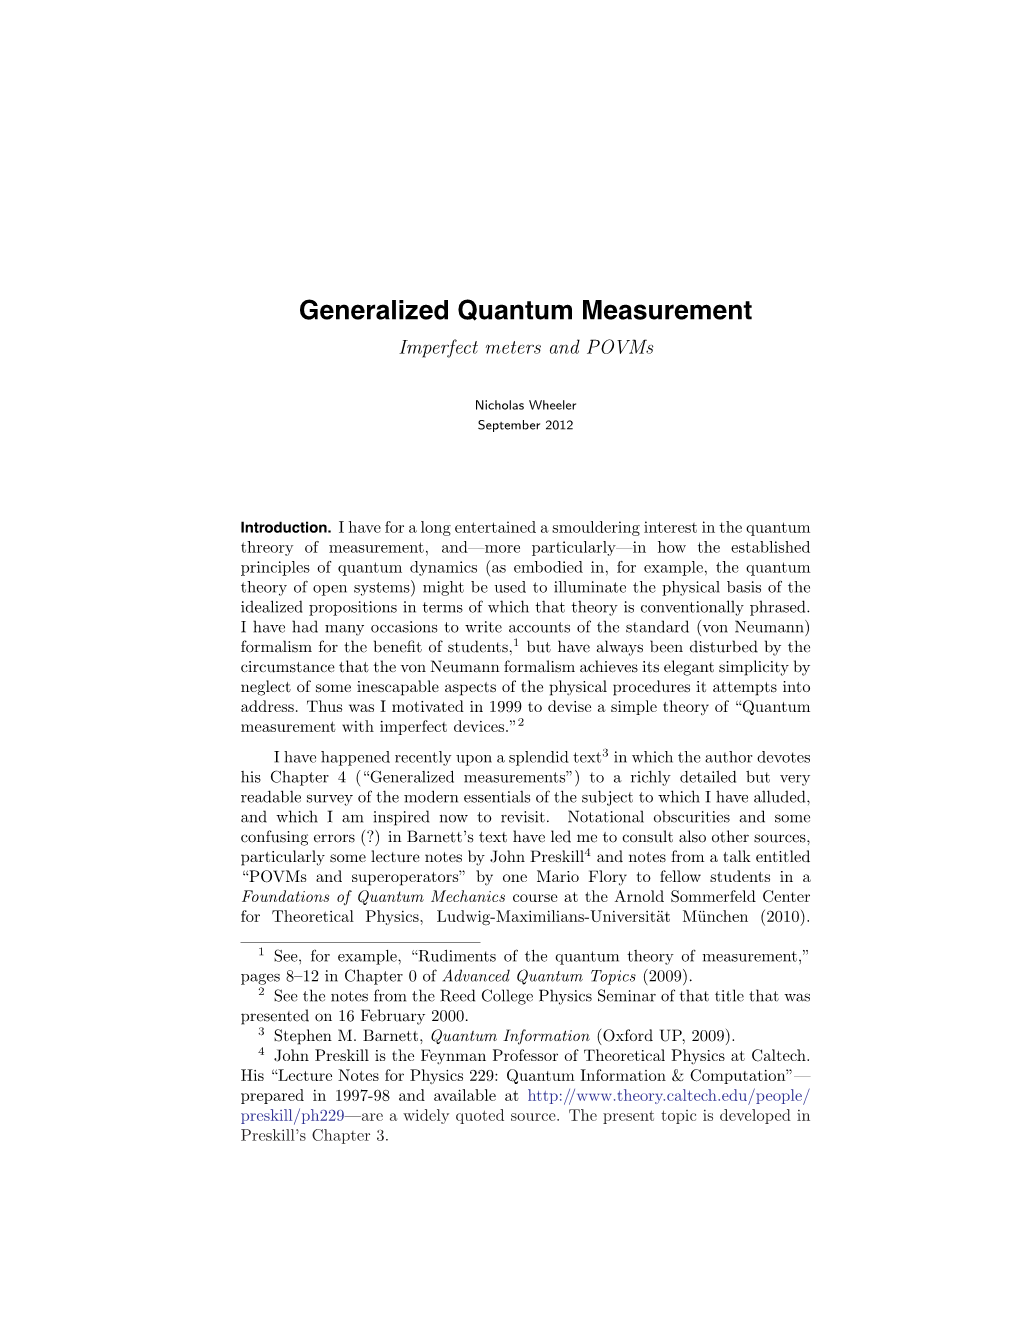 Generalized Quantum Measurement Imperfect Meters and Povms